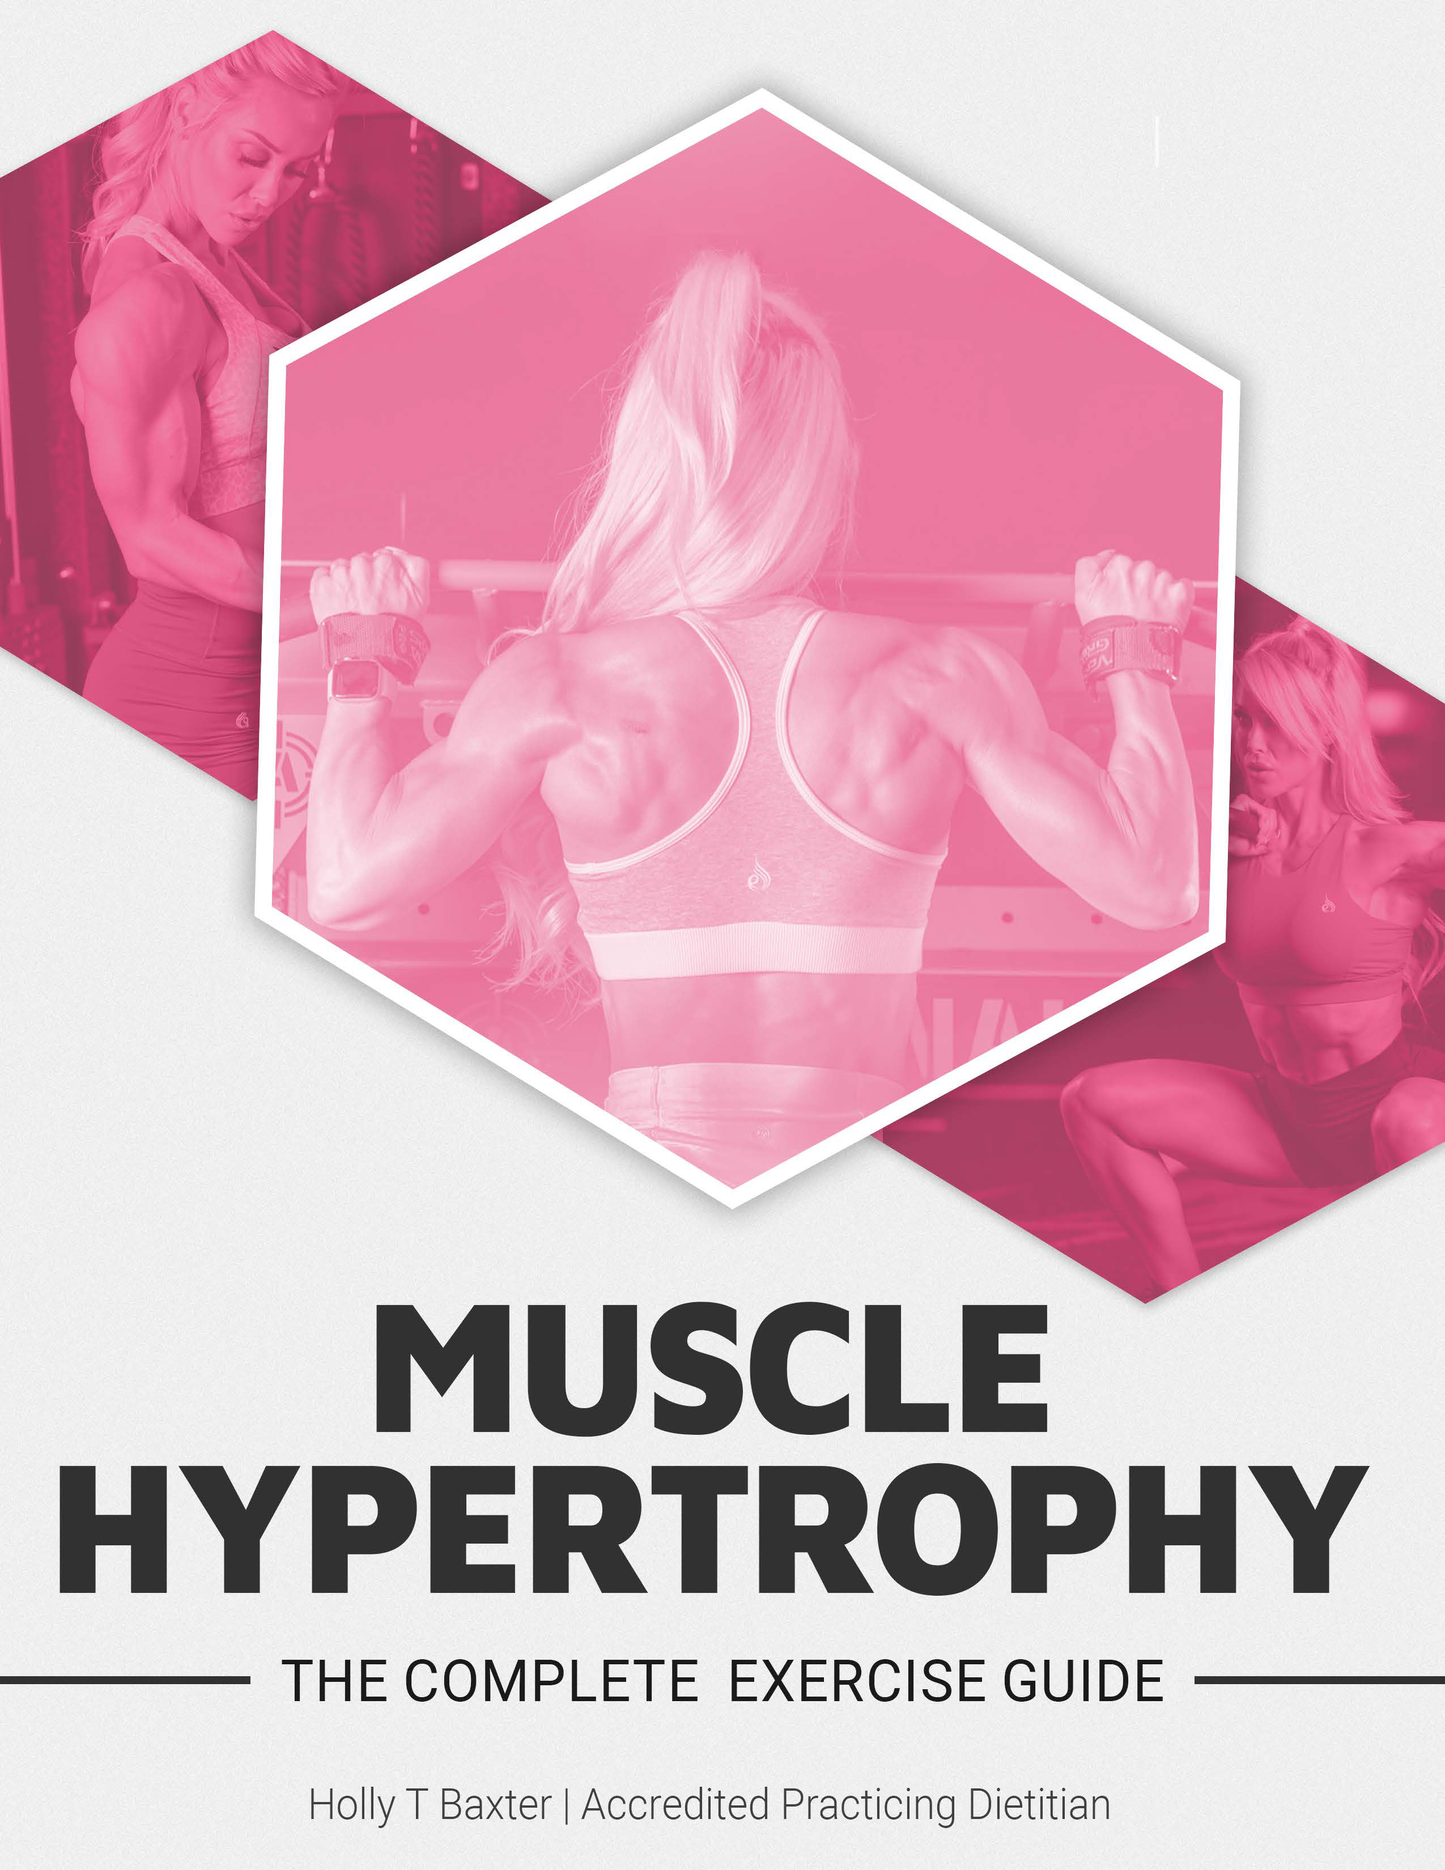 The Complete Exercise Guide To Muscle Hypertrophy